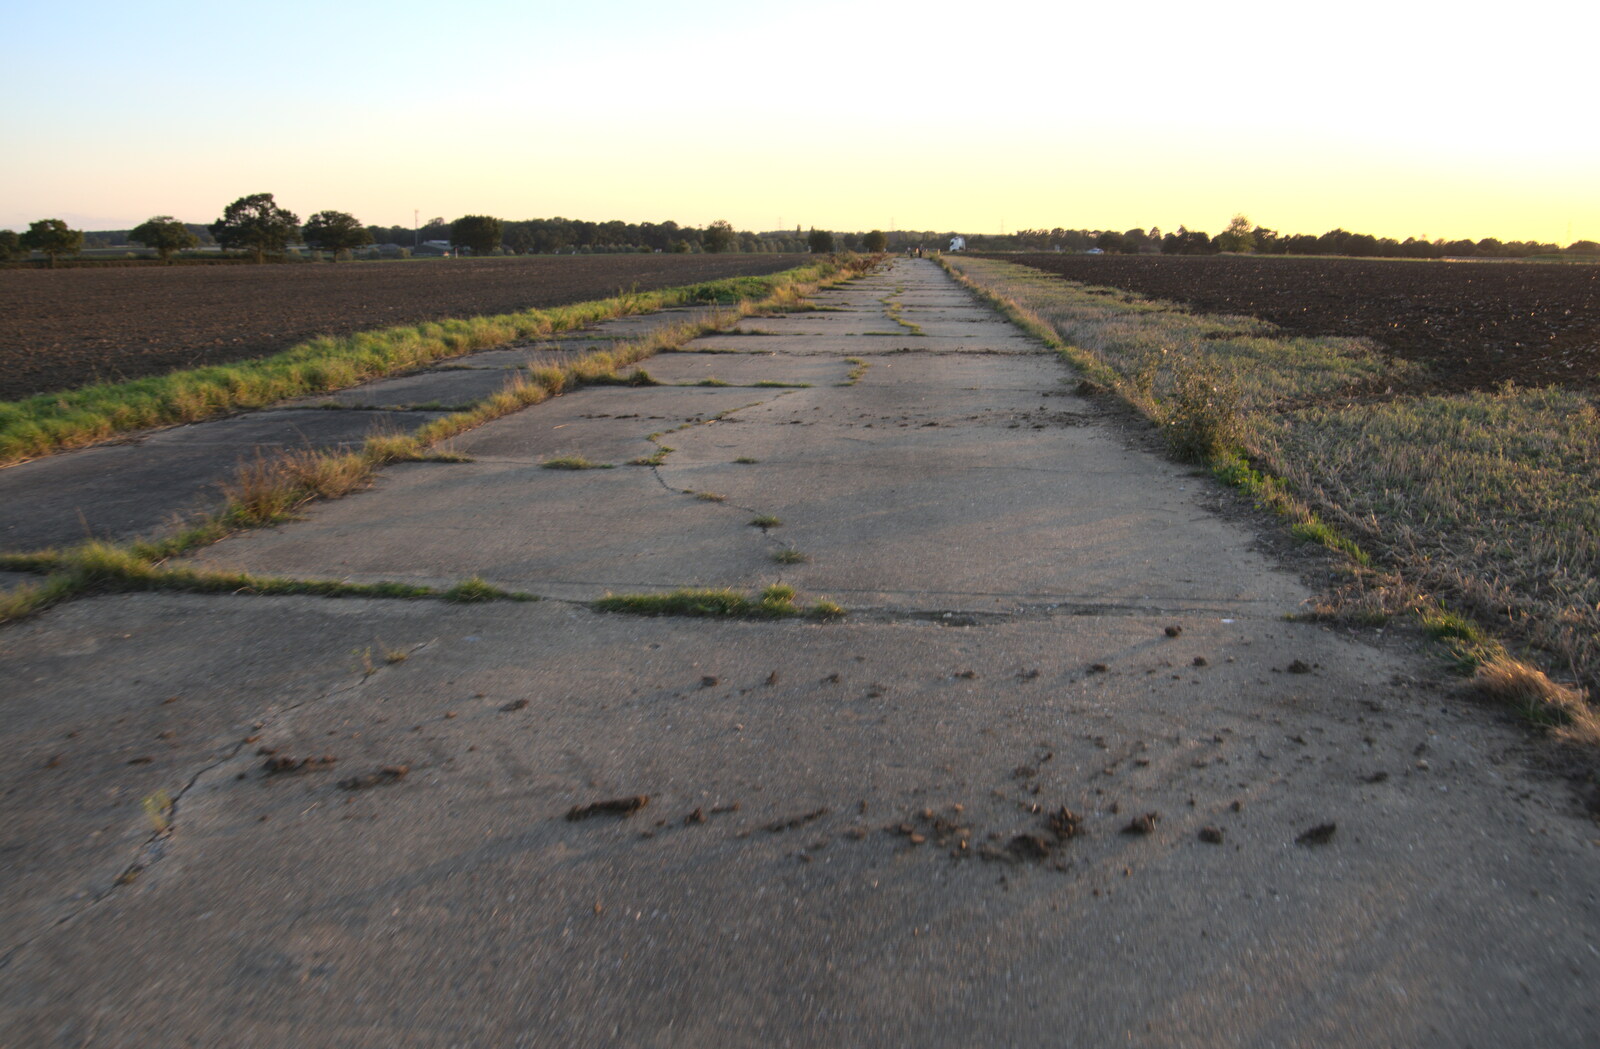 One of the taxi routes, half the width it was from Cycling Eye Airfield and Station 119, Eye, Suffolk - 9th September 2020